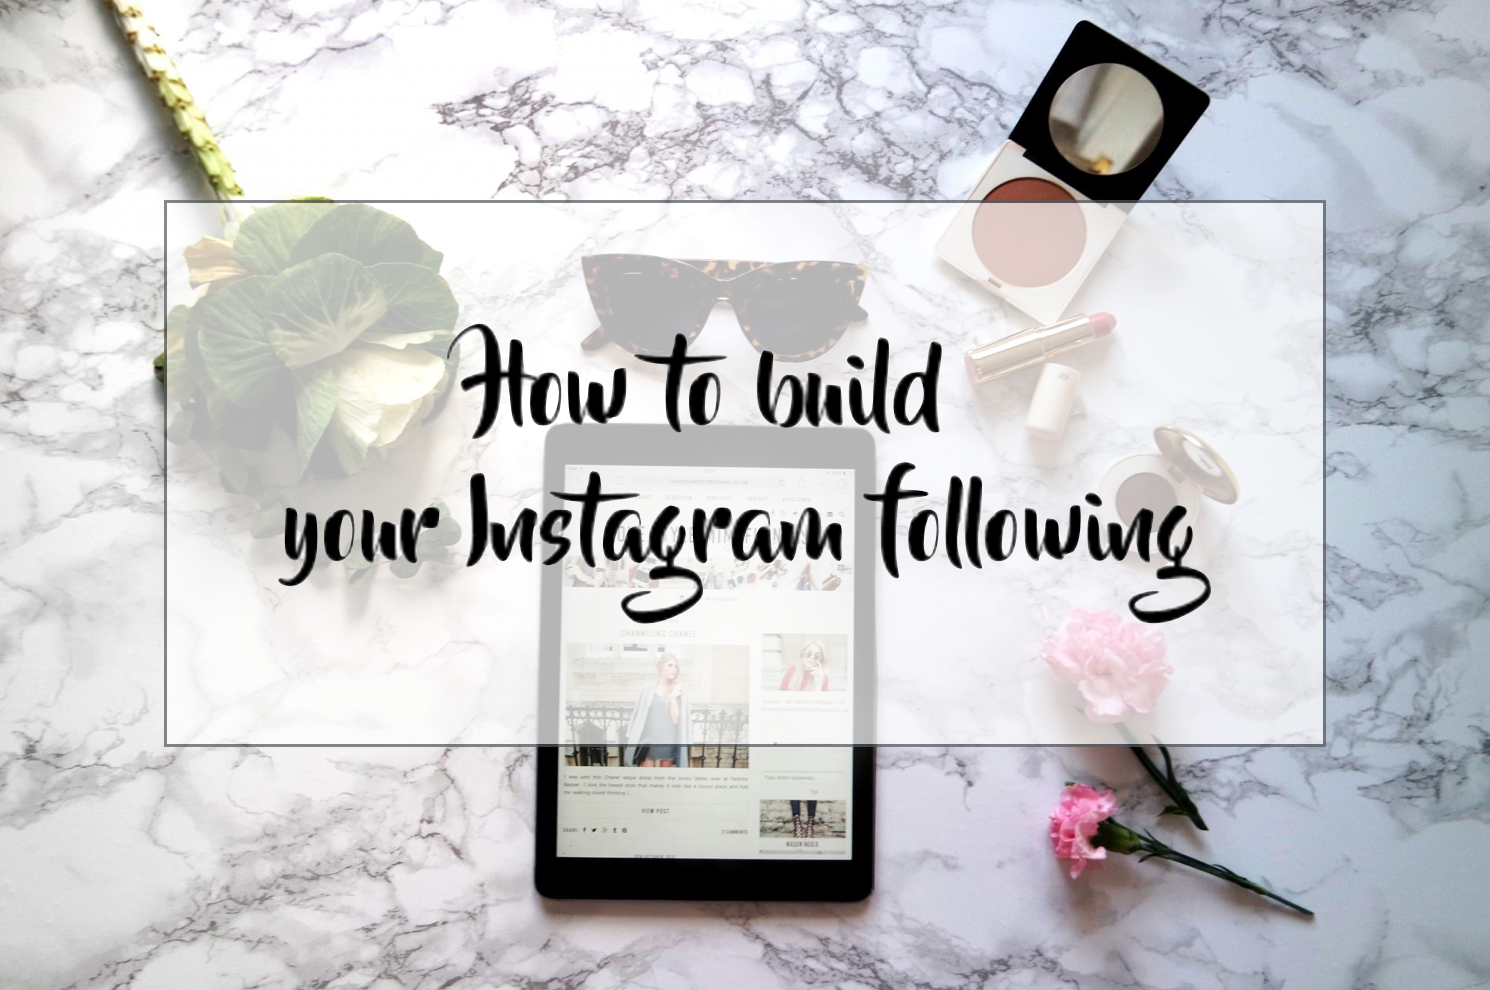 How to build your Instagram following